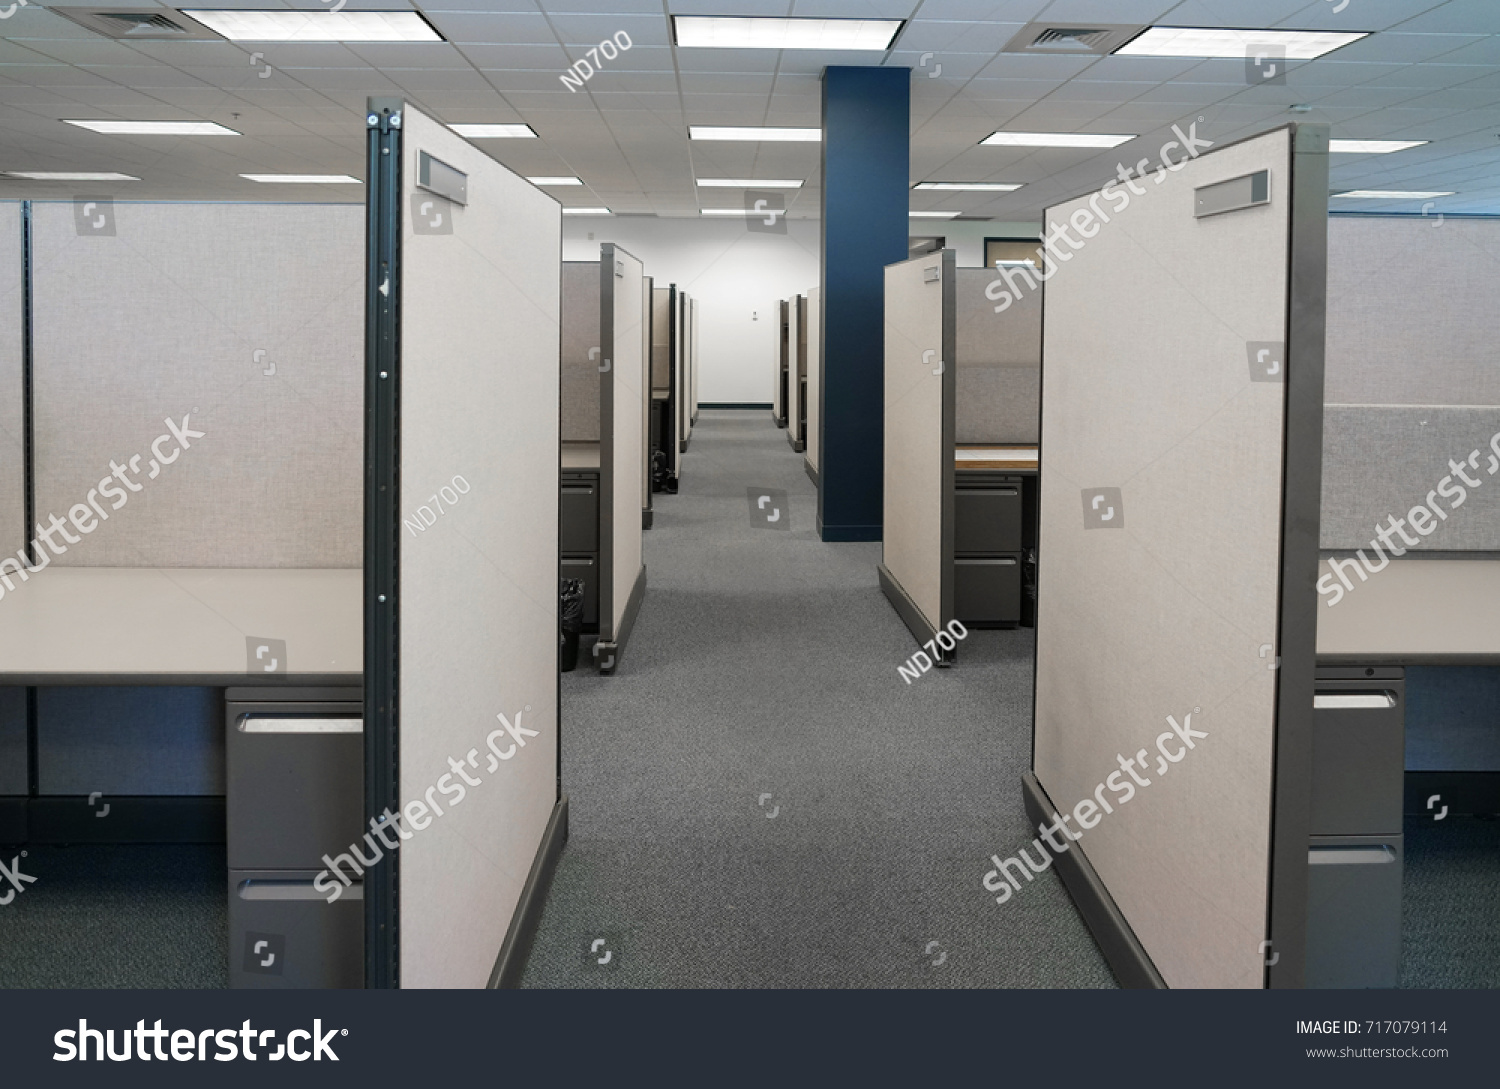 cubicles inside office building, place of work #717079114